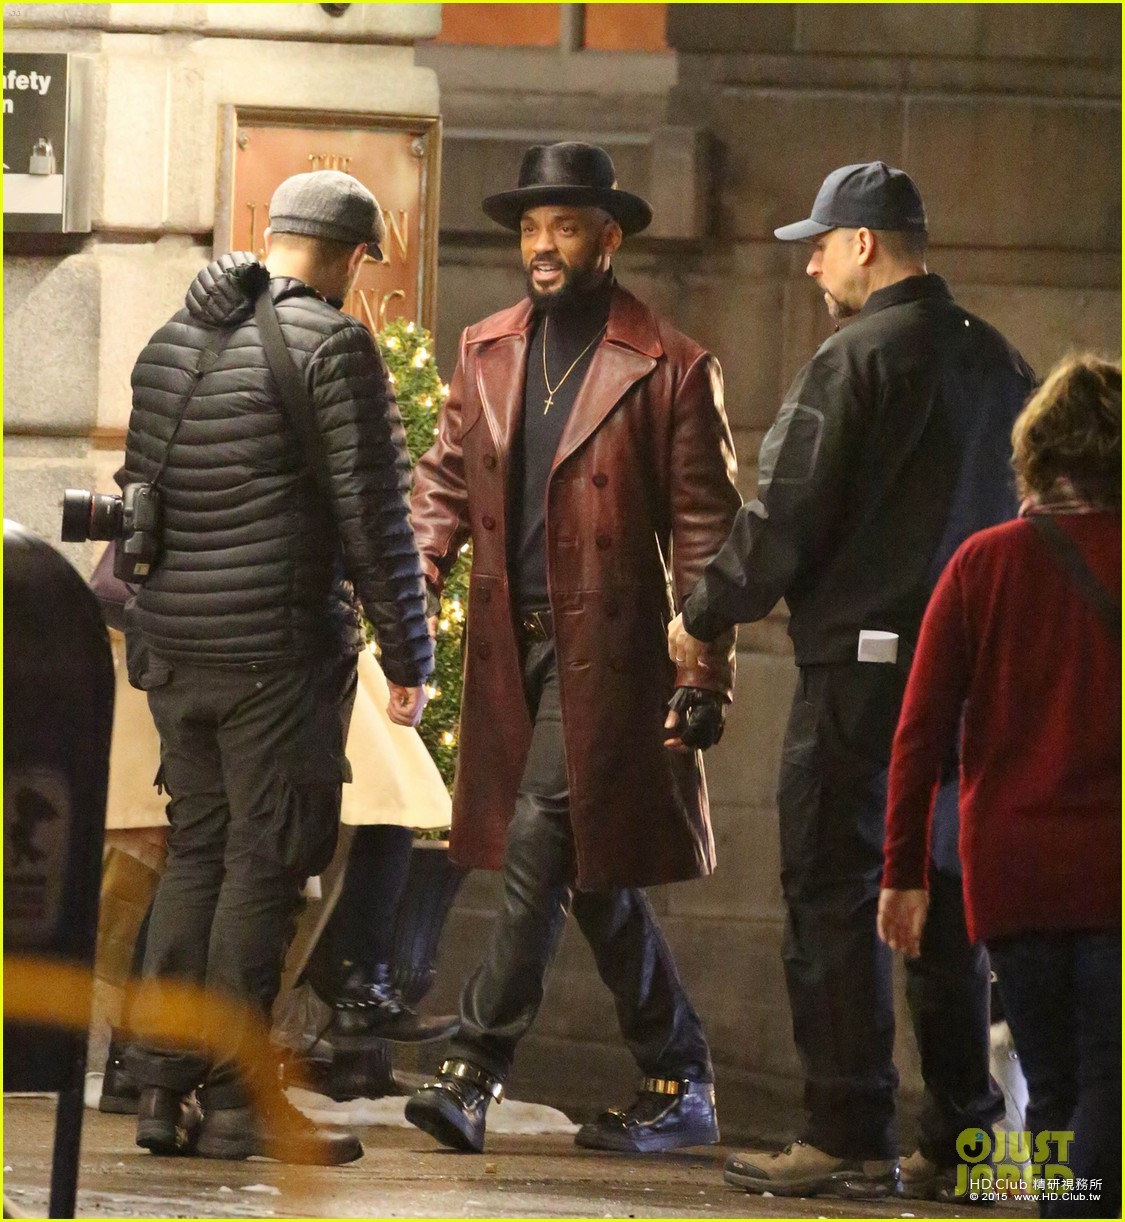 will-smith-spotted-in-costume-on-suicide-squad-set-04.jpg